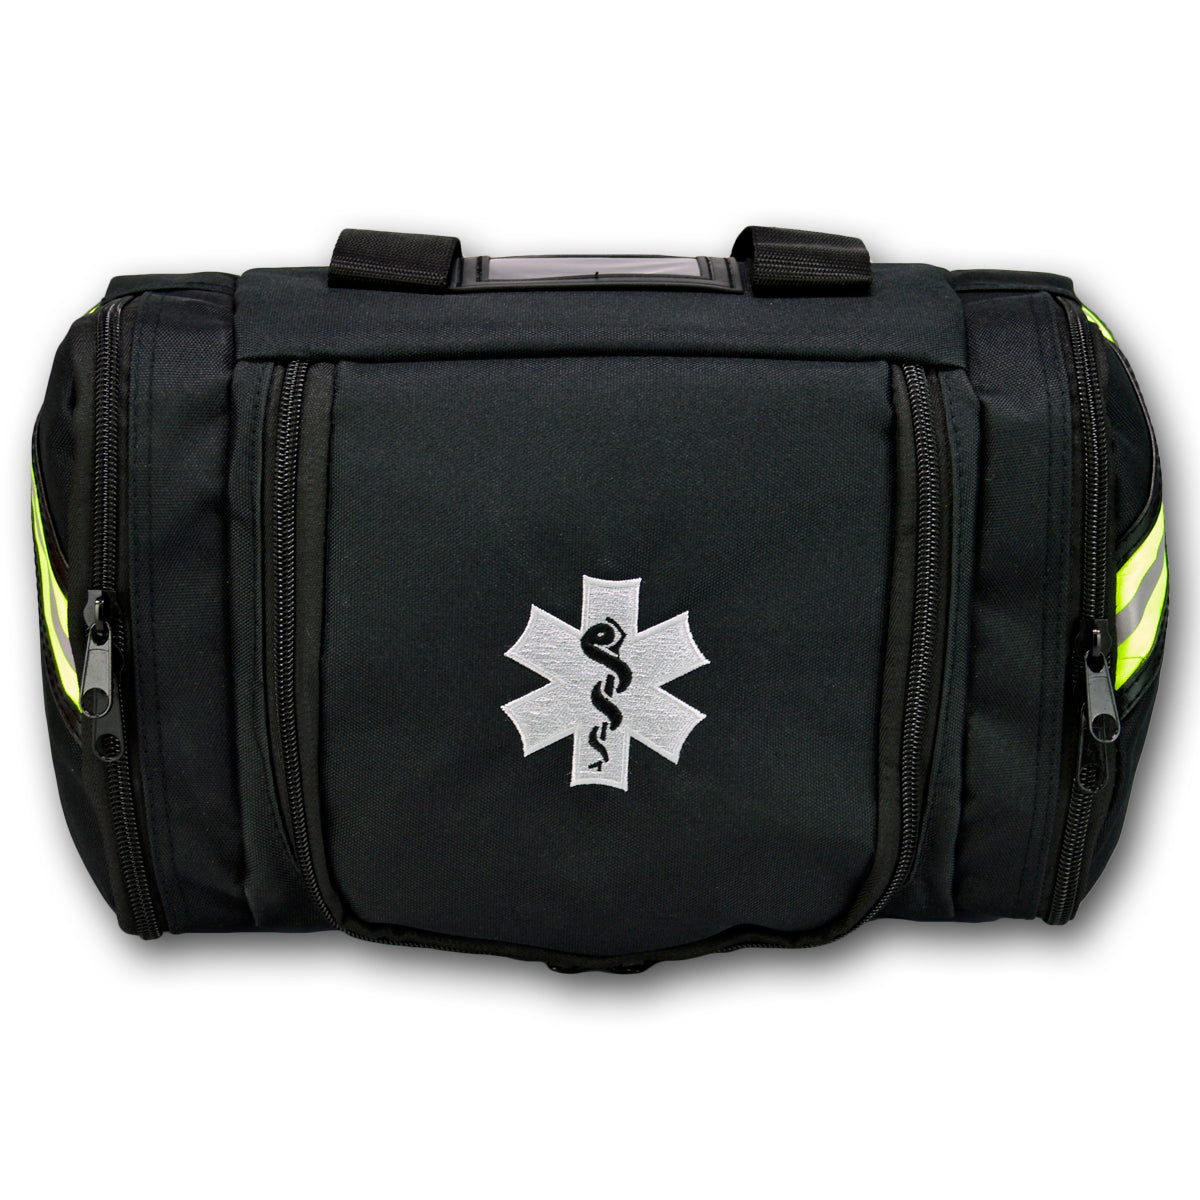 Lightning X Compact Trauma Bag (LXMB10) | The Fire Center | The Fire Store | Store | FREE SHIPPING | The LXMB10 is our most compact first responder bag. It holds the same standard fill kit as our LXMB20, but with a more streamlined fit and value minded design. The bag consists of a main hold with customizable dividers, a storage flap with 6 elastic tool loops, and two full length zippered side pockets.